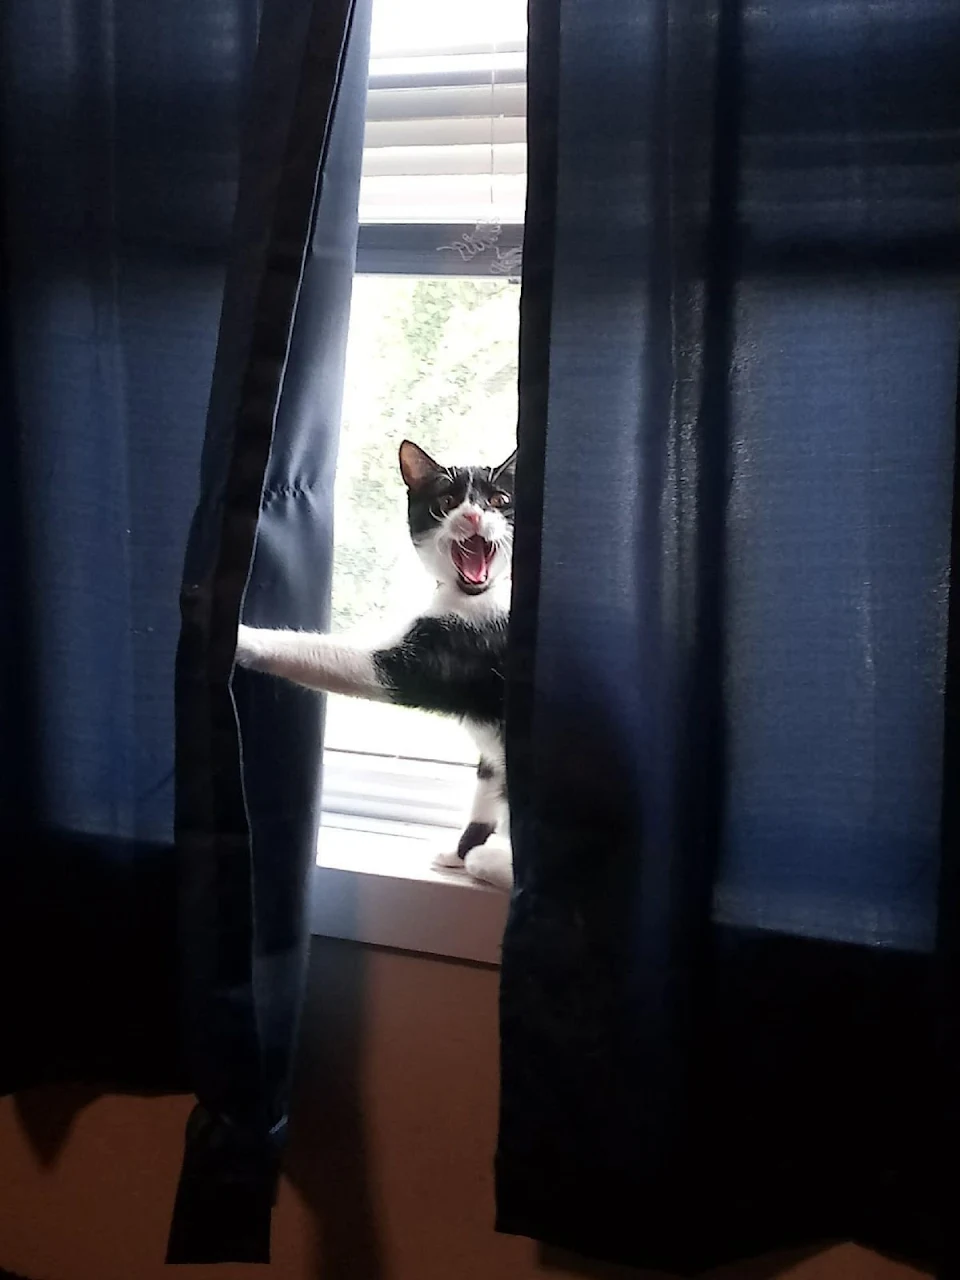 The way our cat, Millie, lets us know someone is here.